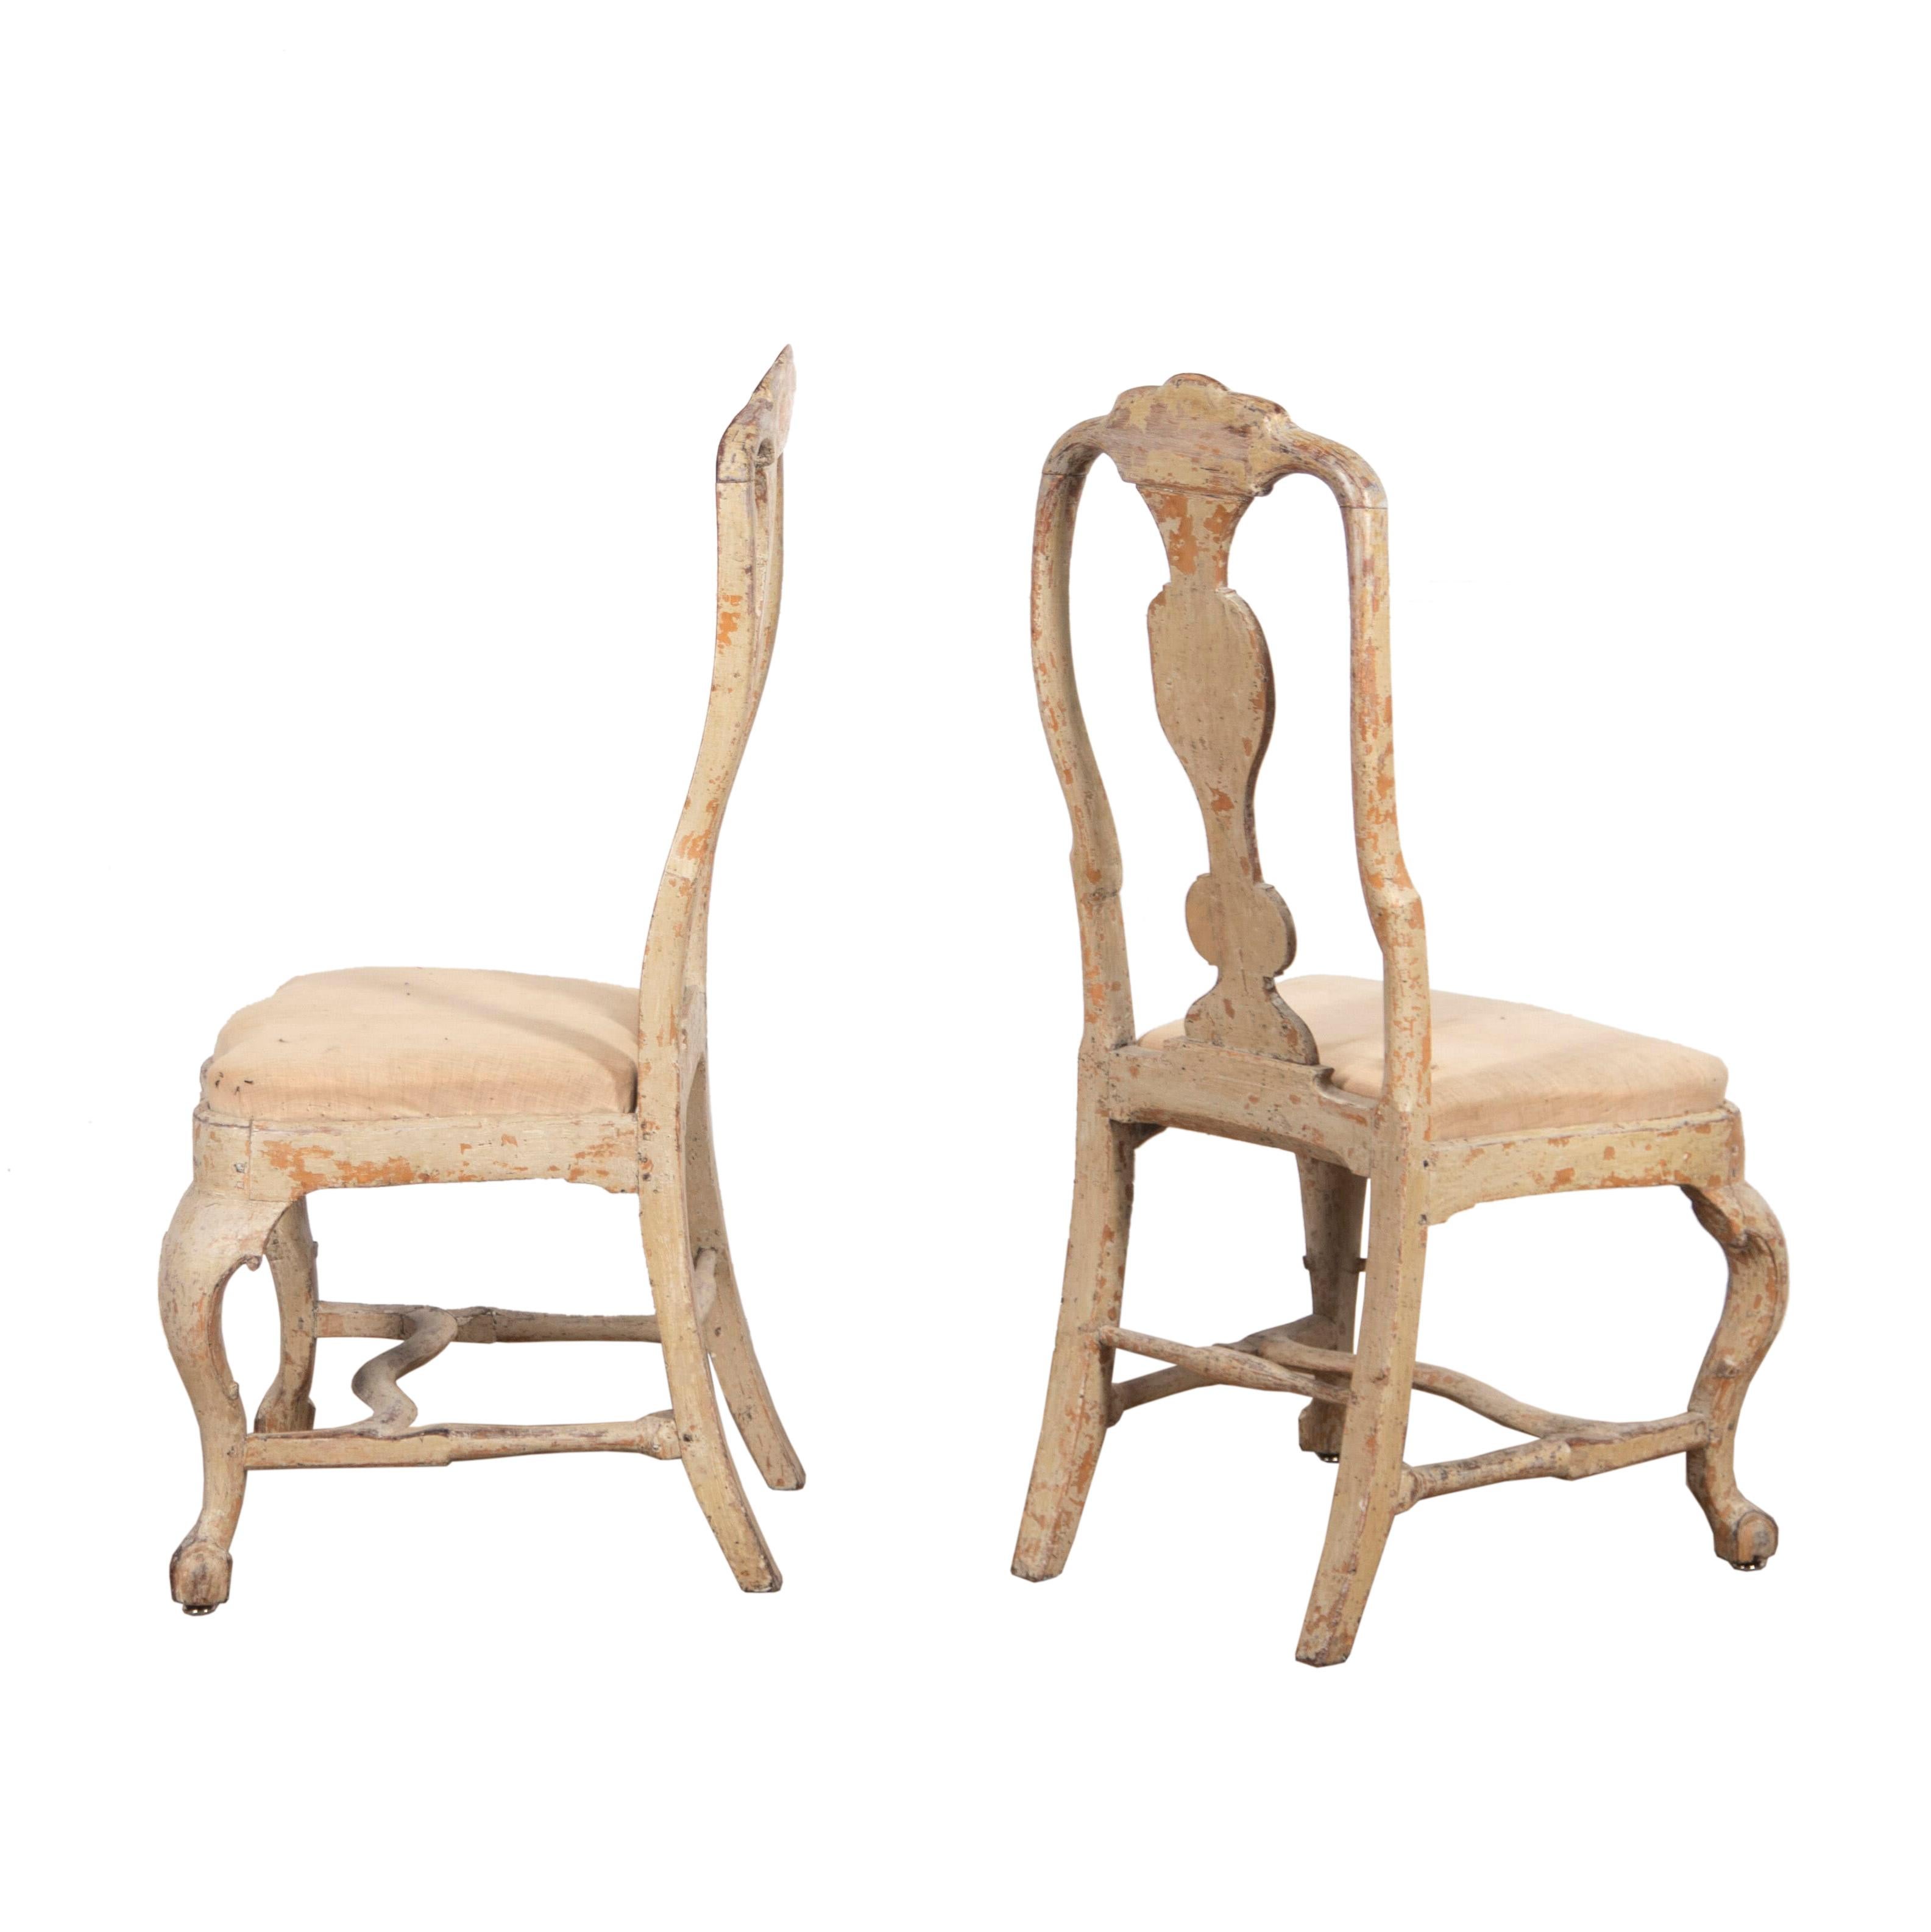 A period pair of side chairs from Lindome in Sweden with decorative carving to the back and front stretcher. Cabriolet legs taper to claw and ball feet. This piece has been dry scraped to original paint.